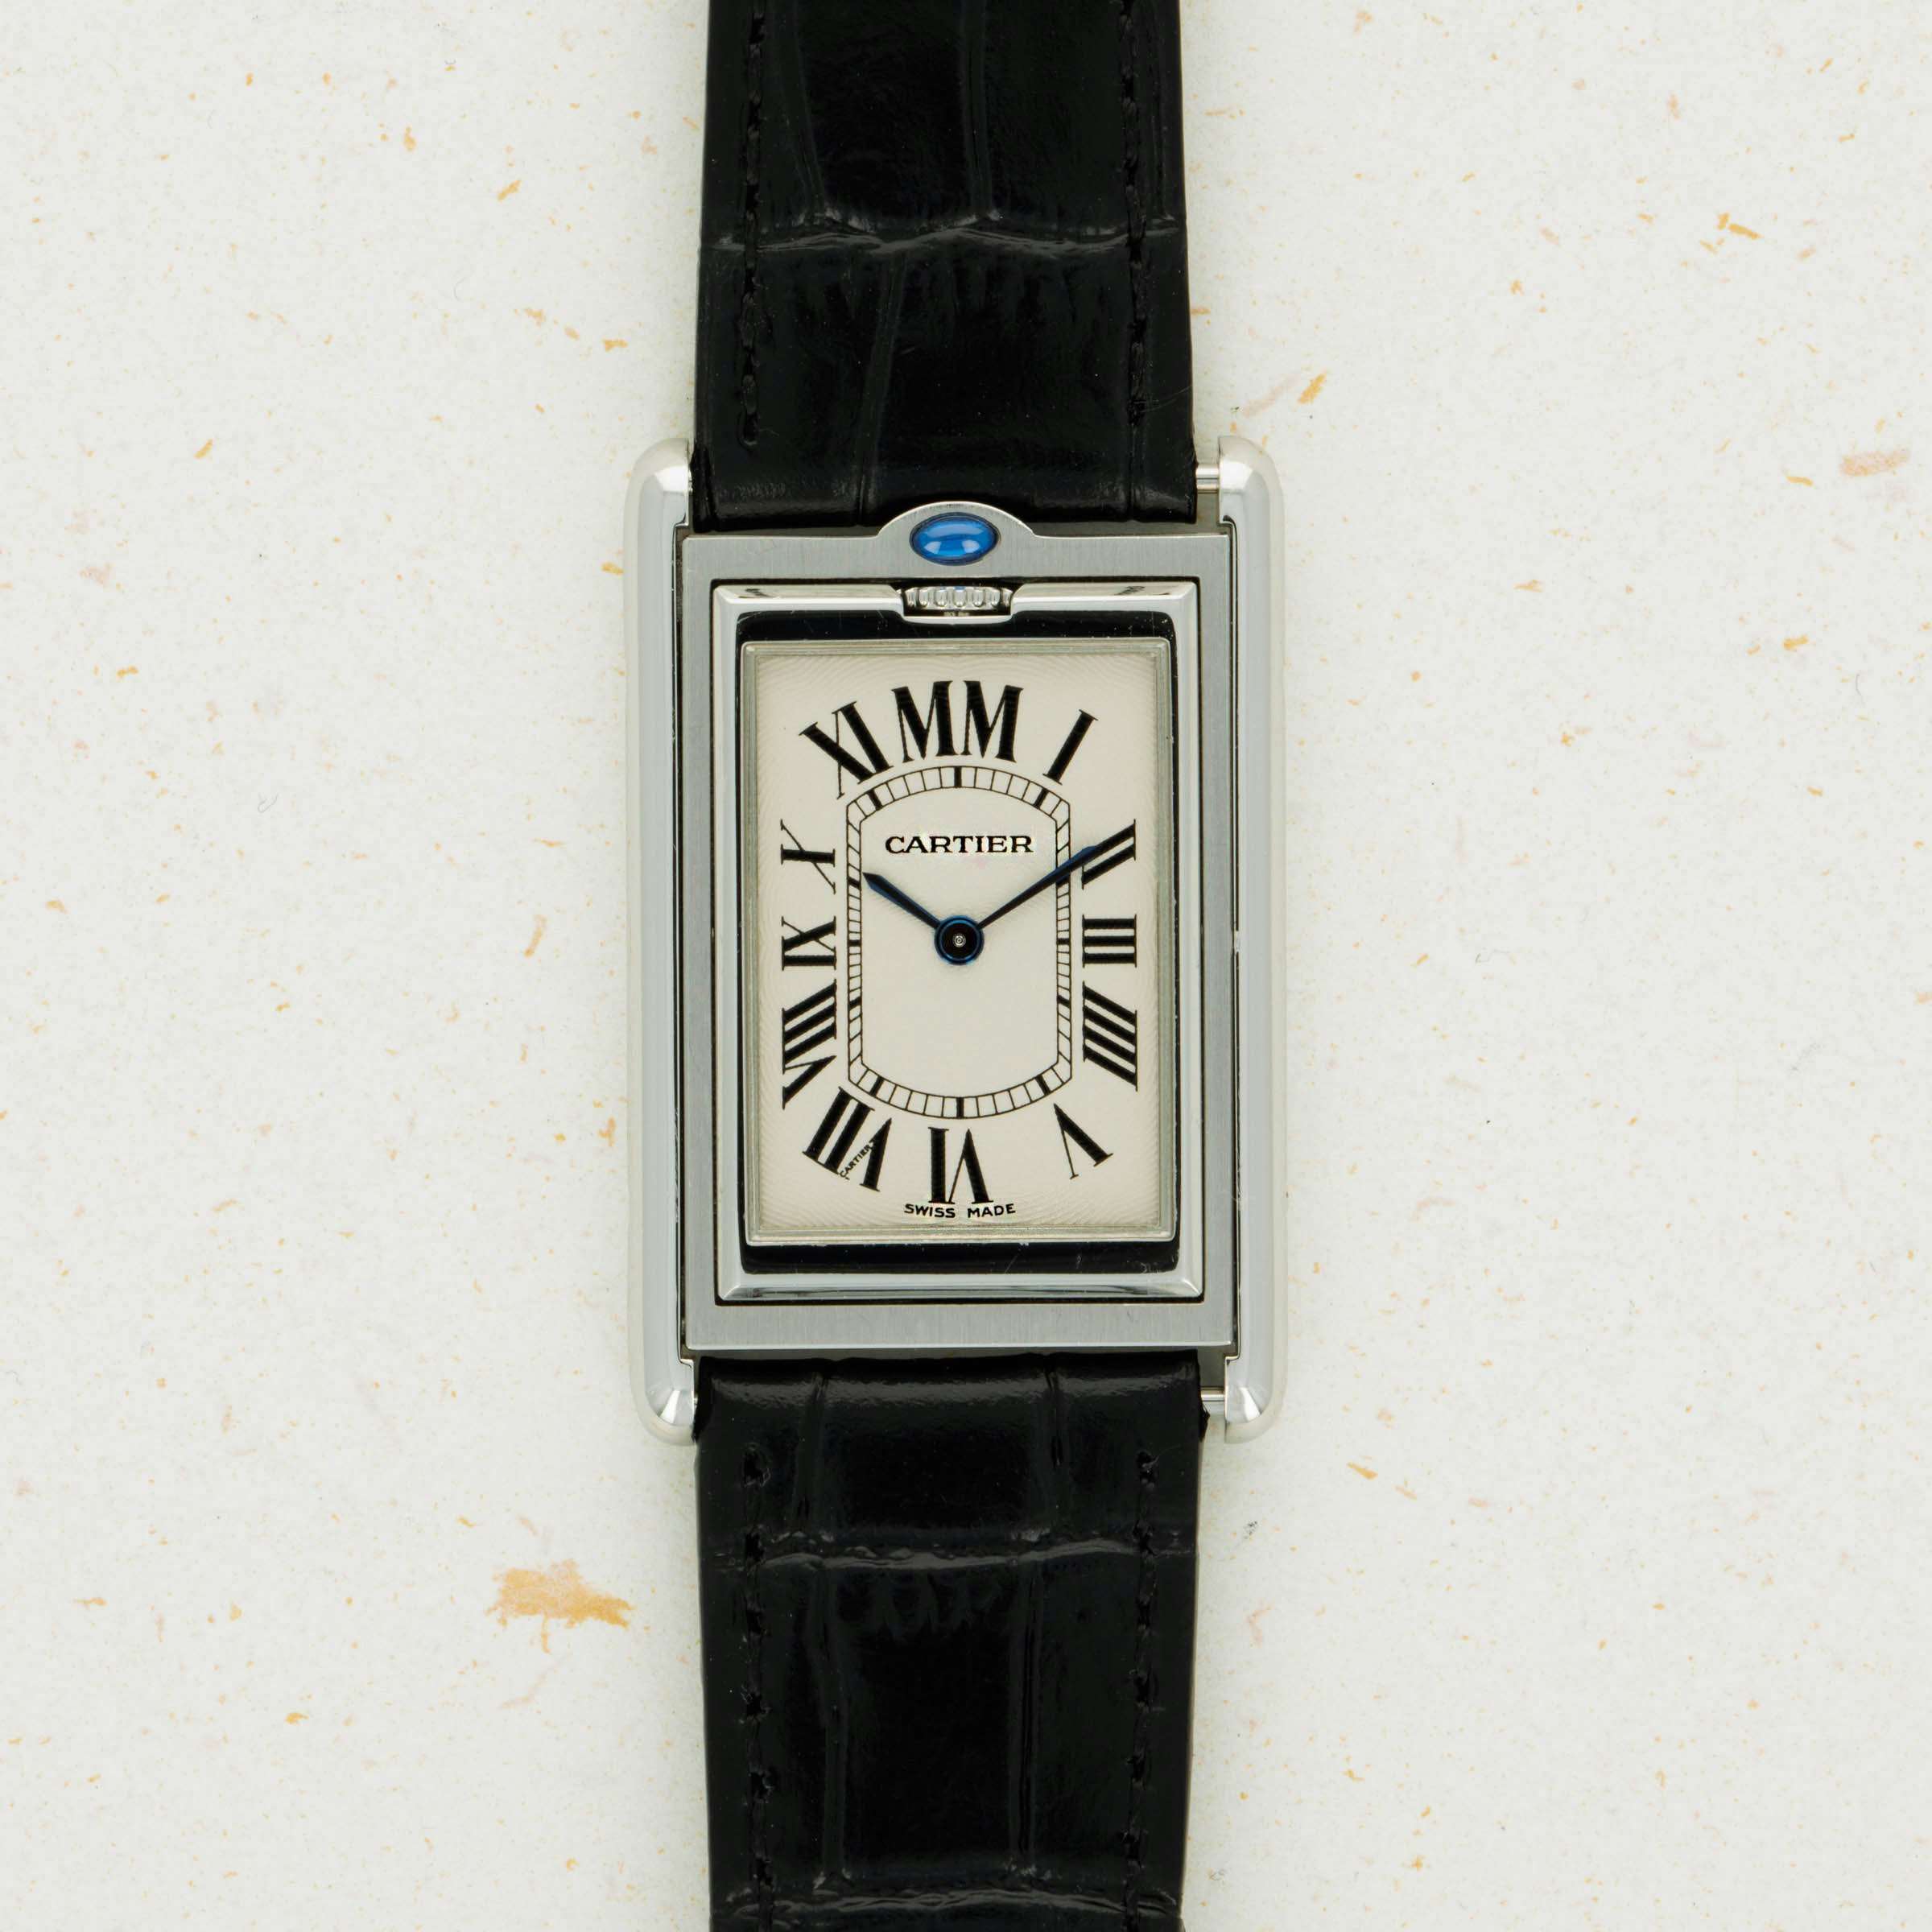 Thumbnail for Cartier Tank Basculante Millennium Limited Edition 2390